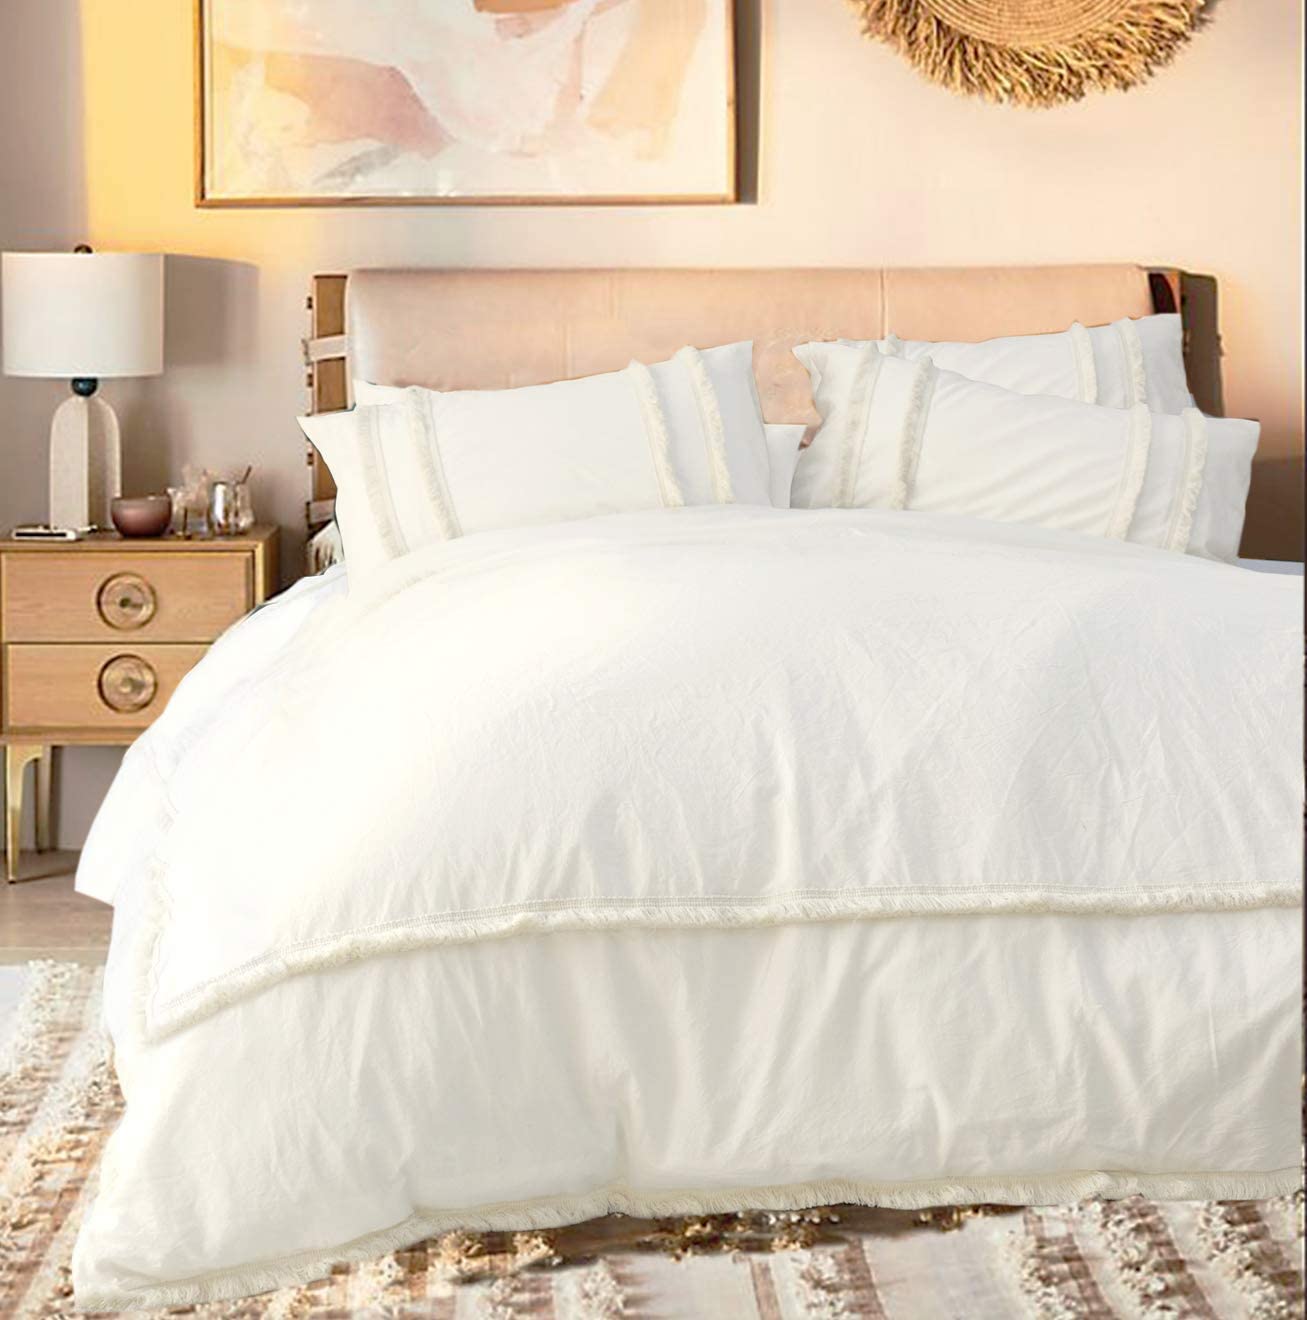 Creatice White Bohemian Bedroom with Simple Decor